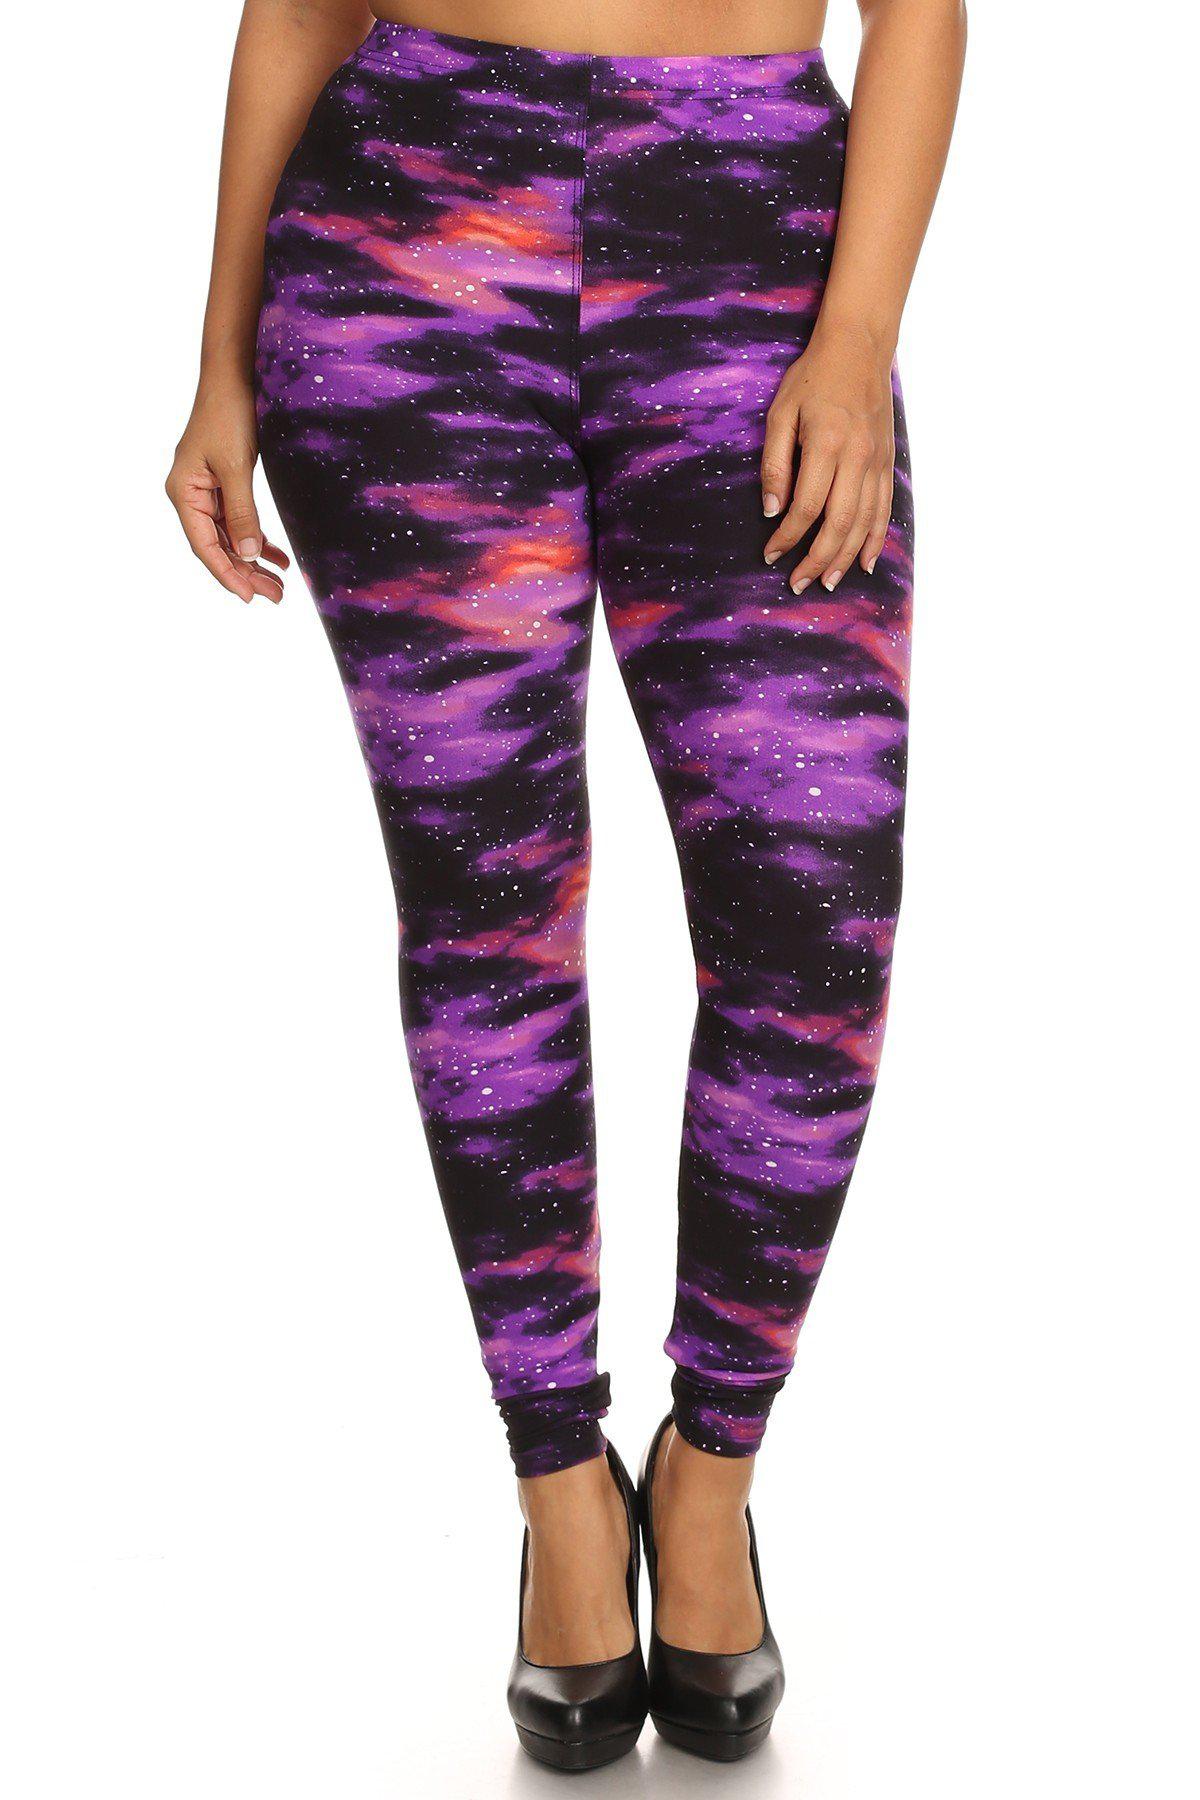 Plus Size Super Soft Peach Skin Fabric, Galaxy Graphic Printed Knit Legging With Elastic Waist Detail. High Waist Fit-[Adult]-[Female]-Multi-Blue Zone Planet